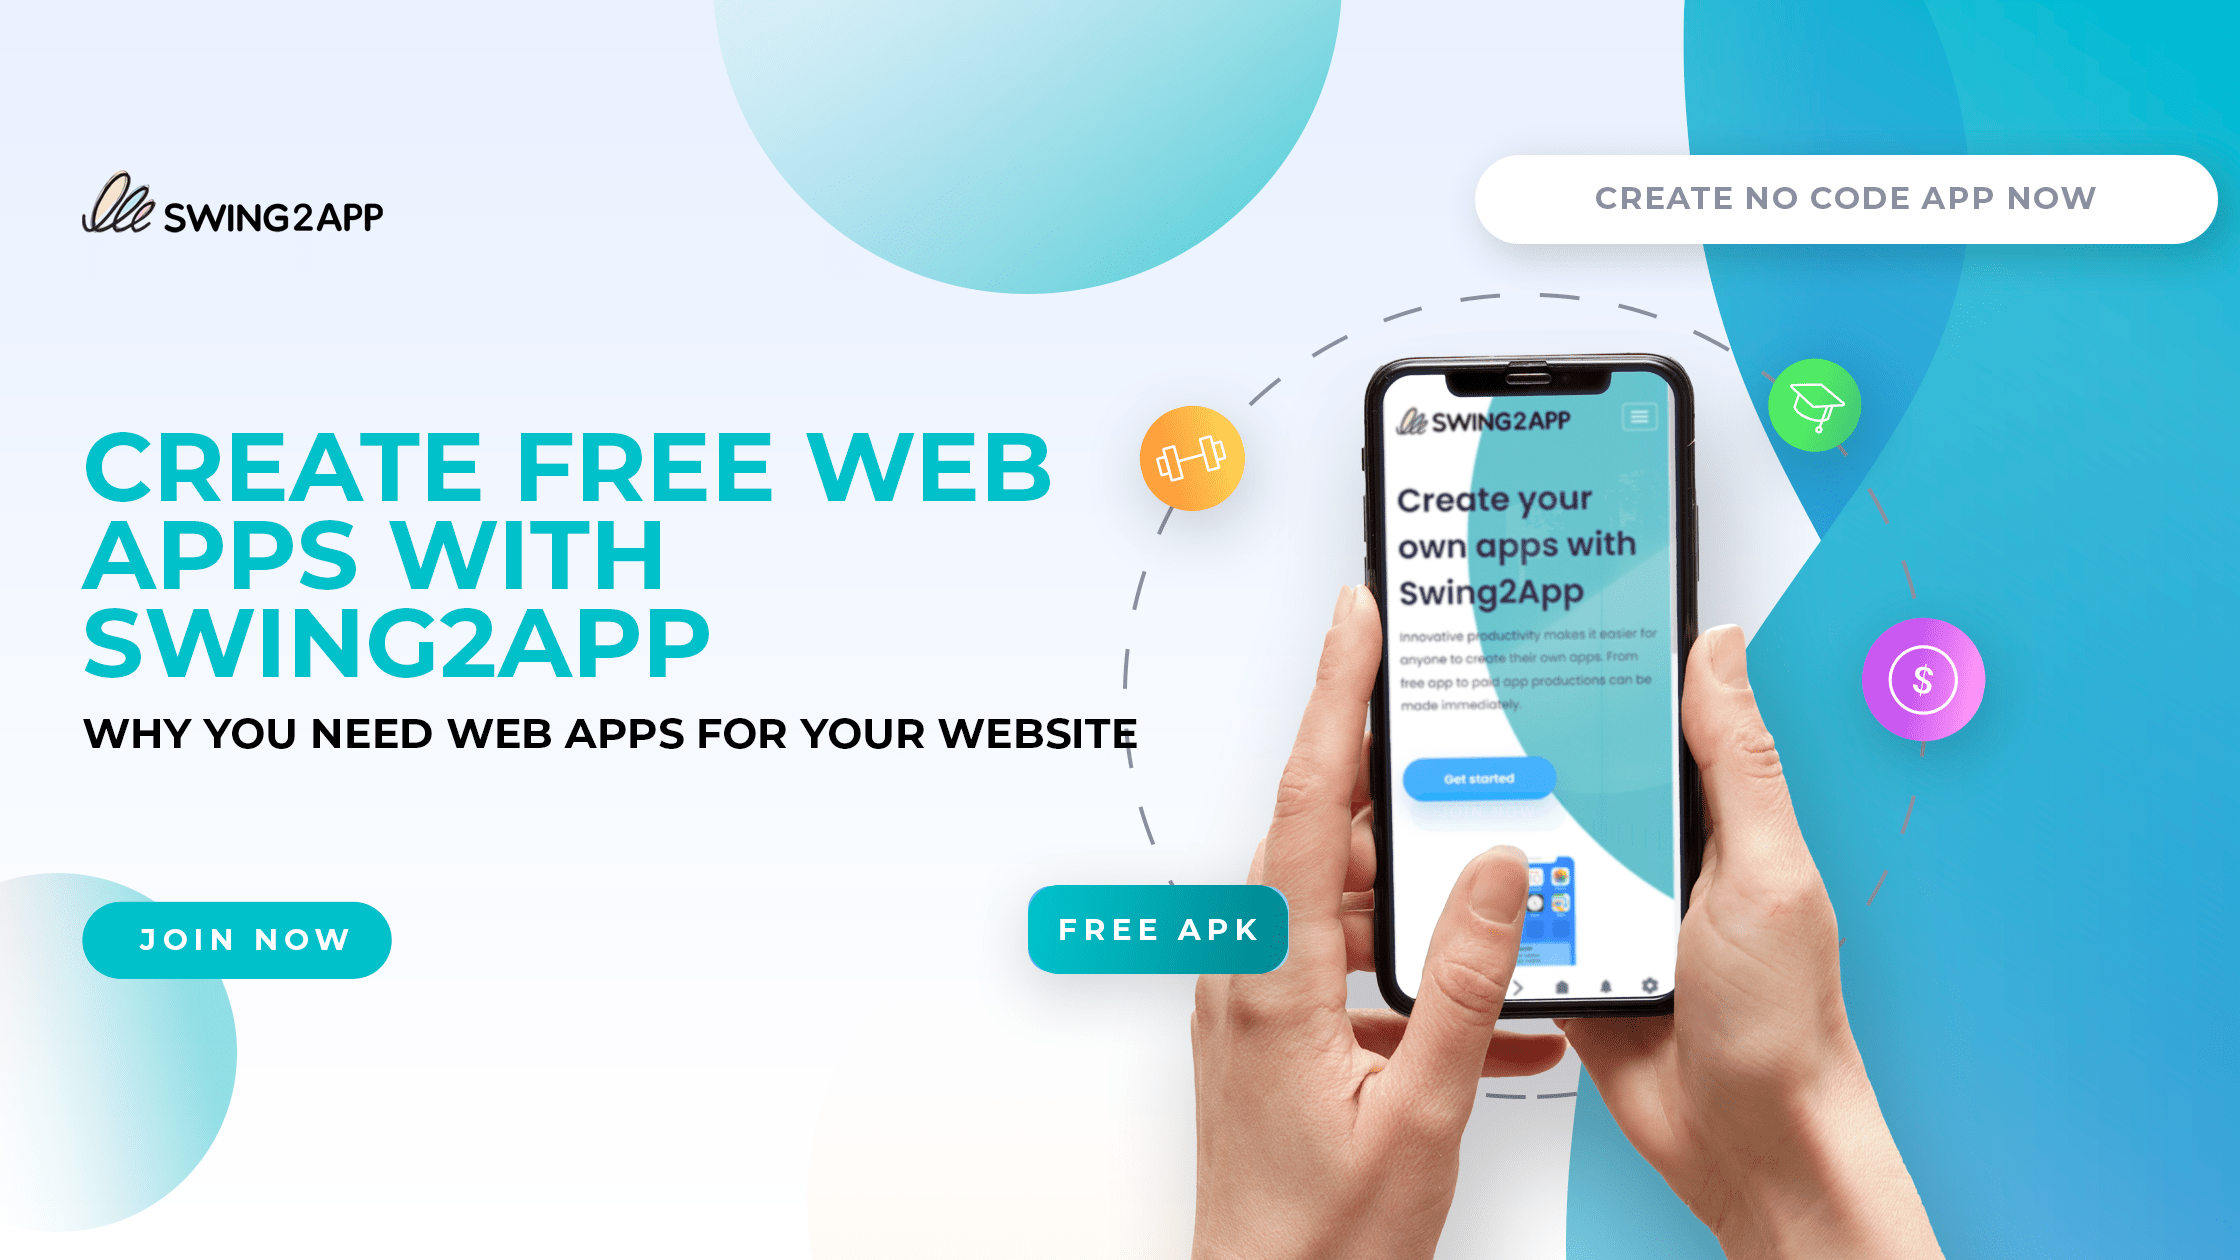 CREATE FREE WEB APPS WITH SWING2APP: WHY YOU NEED WEB APPS FOR YOUR WEBSITE